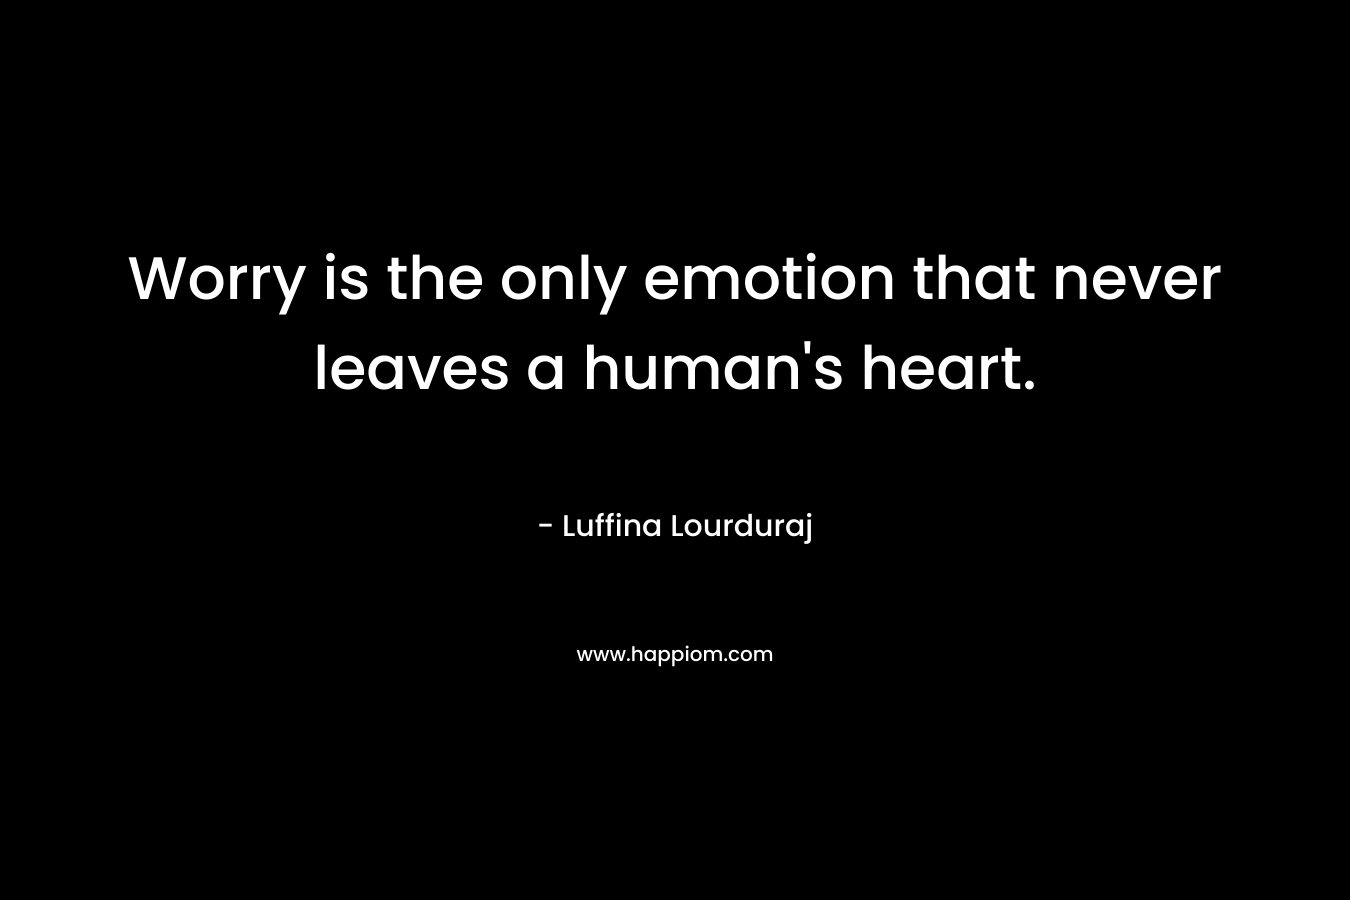 Worry is the only emotion that never leaves a human’s heart. – Luffina Lourduraj